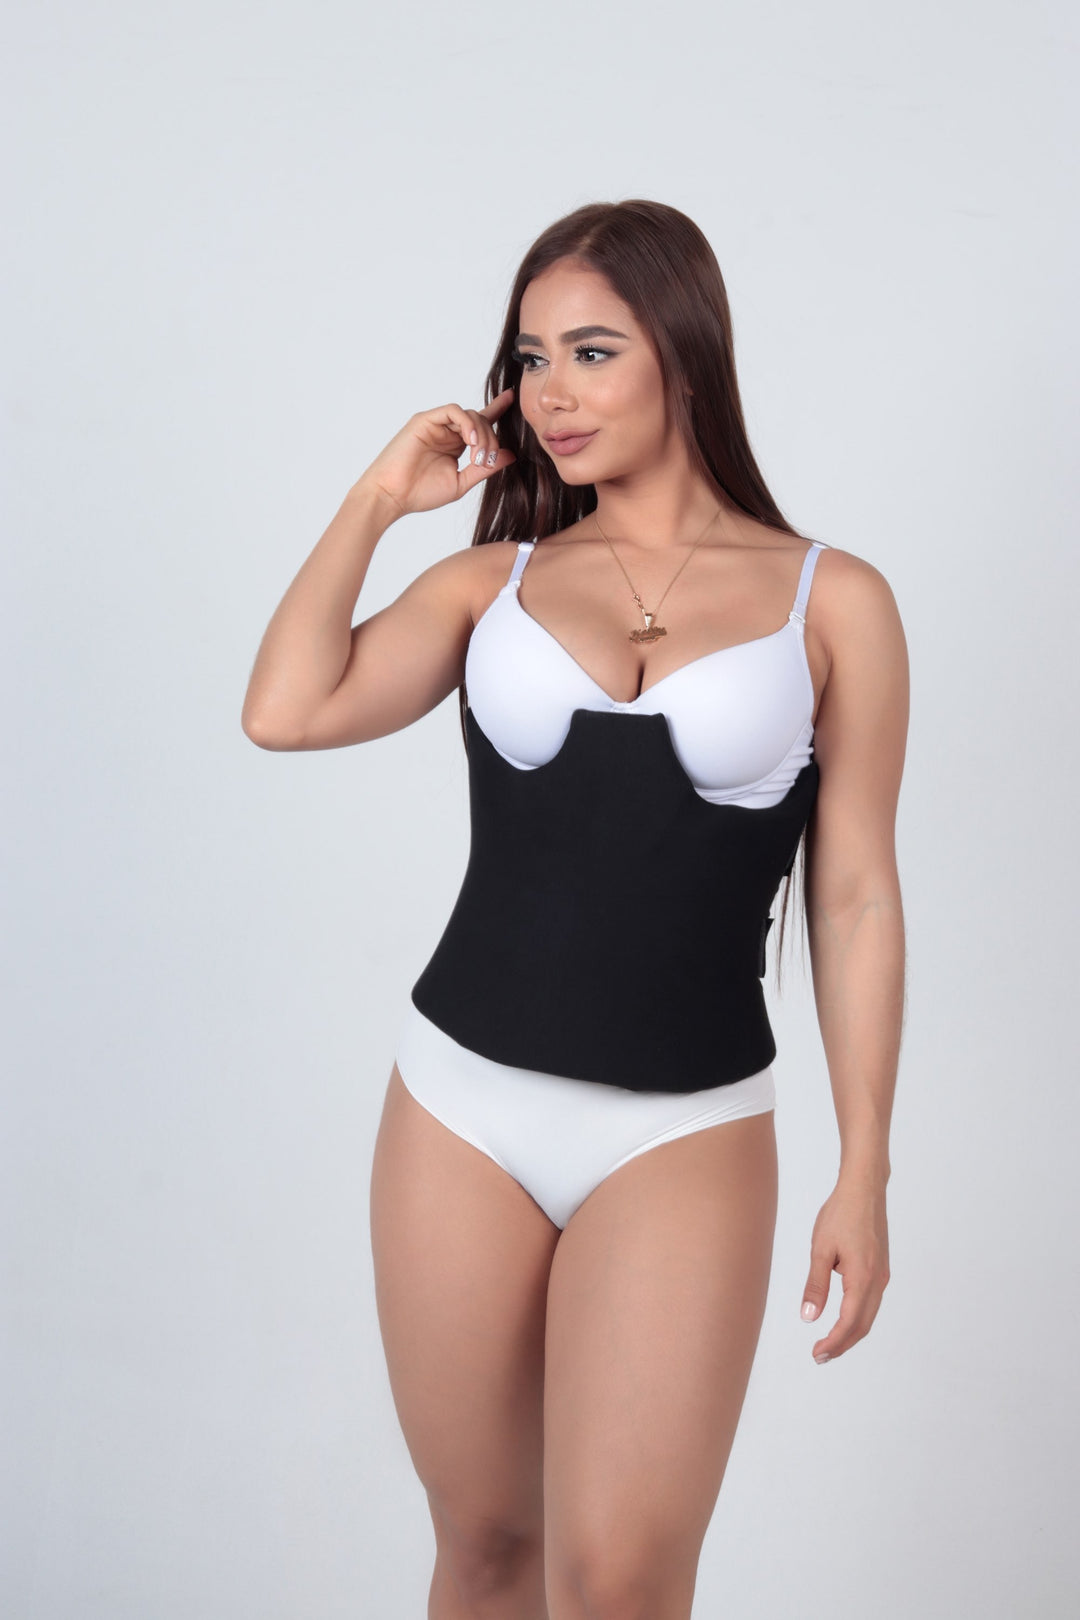 High compression fajas that fit all body types! 🤩 Enter our website a